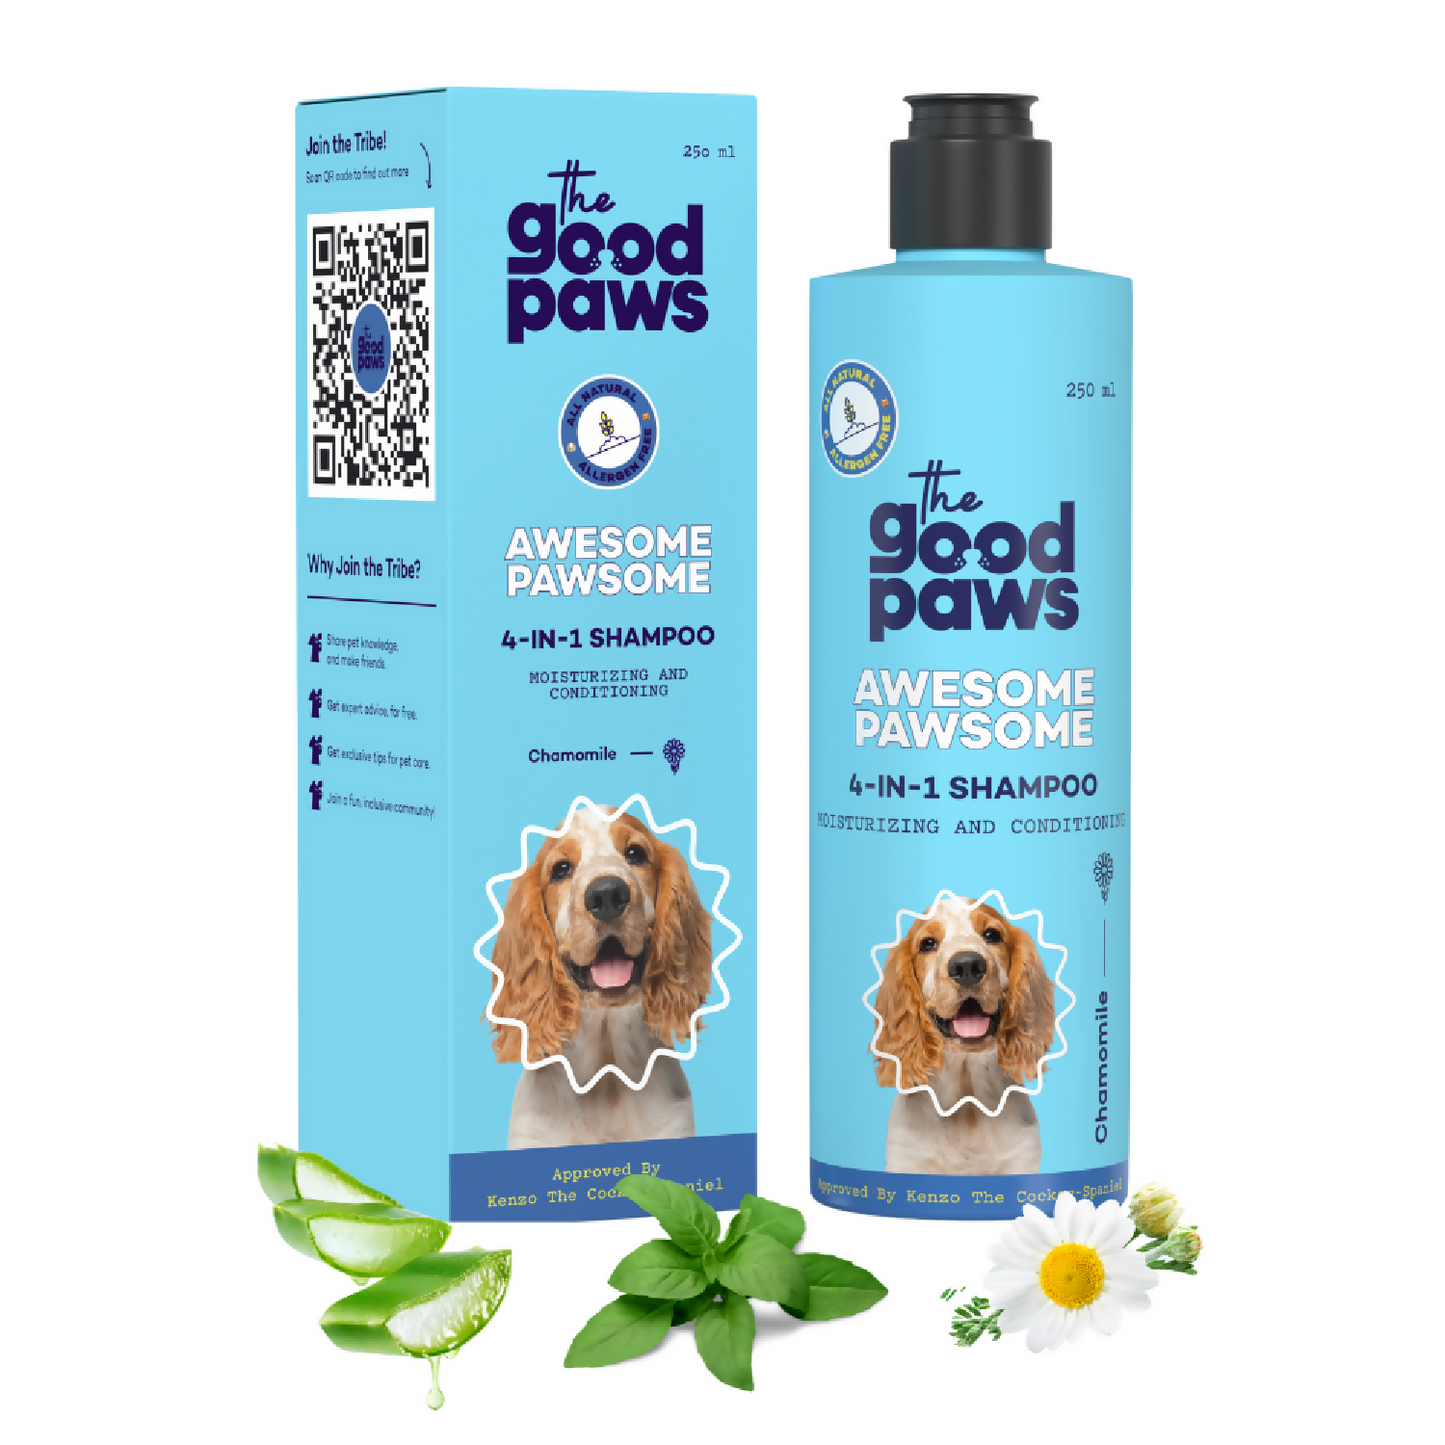 The Good Paws Awesome Pawsome 4 in 1 Dog Shampoo | Moisturizing & Conditioning | Cleanse & Deodorize